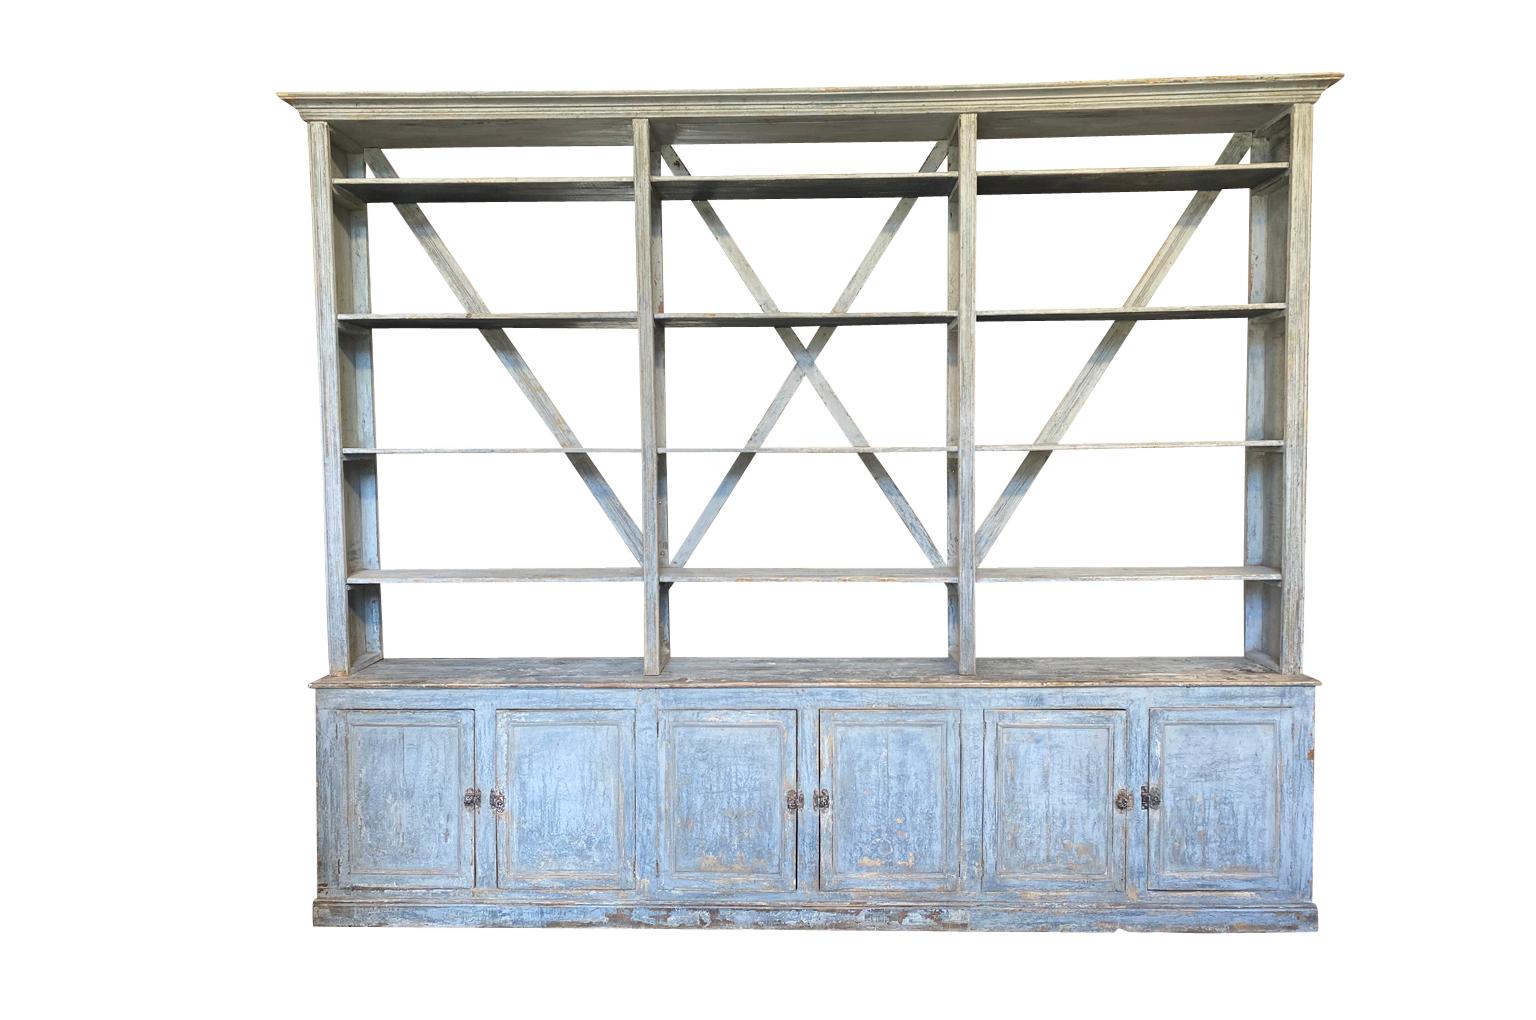 An outstanding mid-19th century bookcase from the Catalan region of Spain. Origining from a shop, this bookcase is soundly constructed from painted wood. Wonderful display and storage.